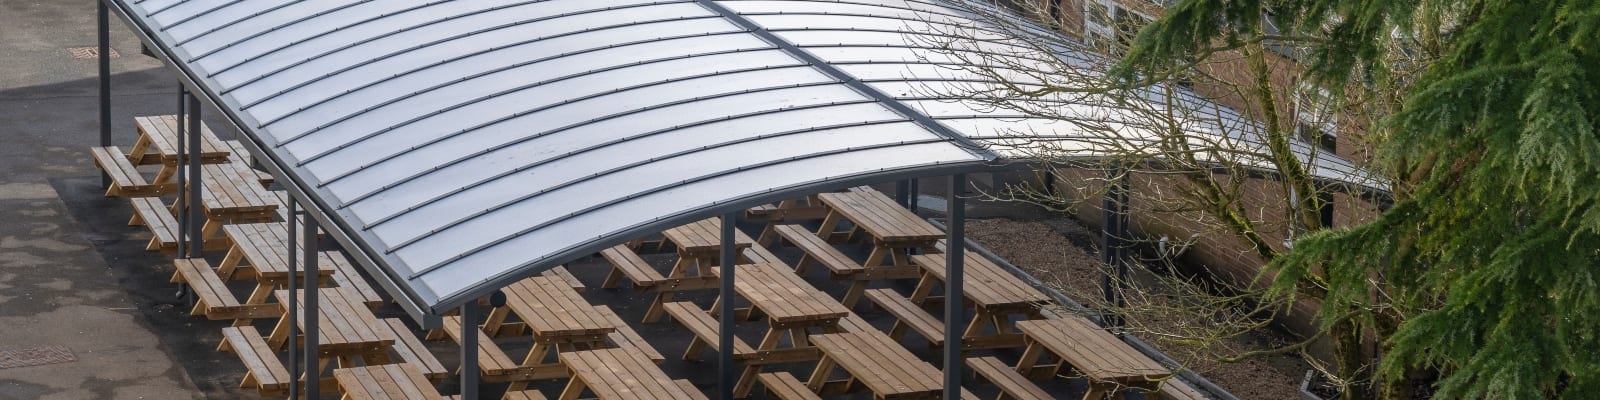 Cirencester College Curved Roof Shelter